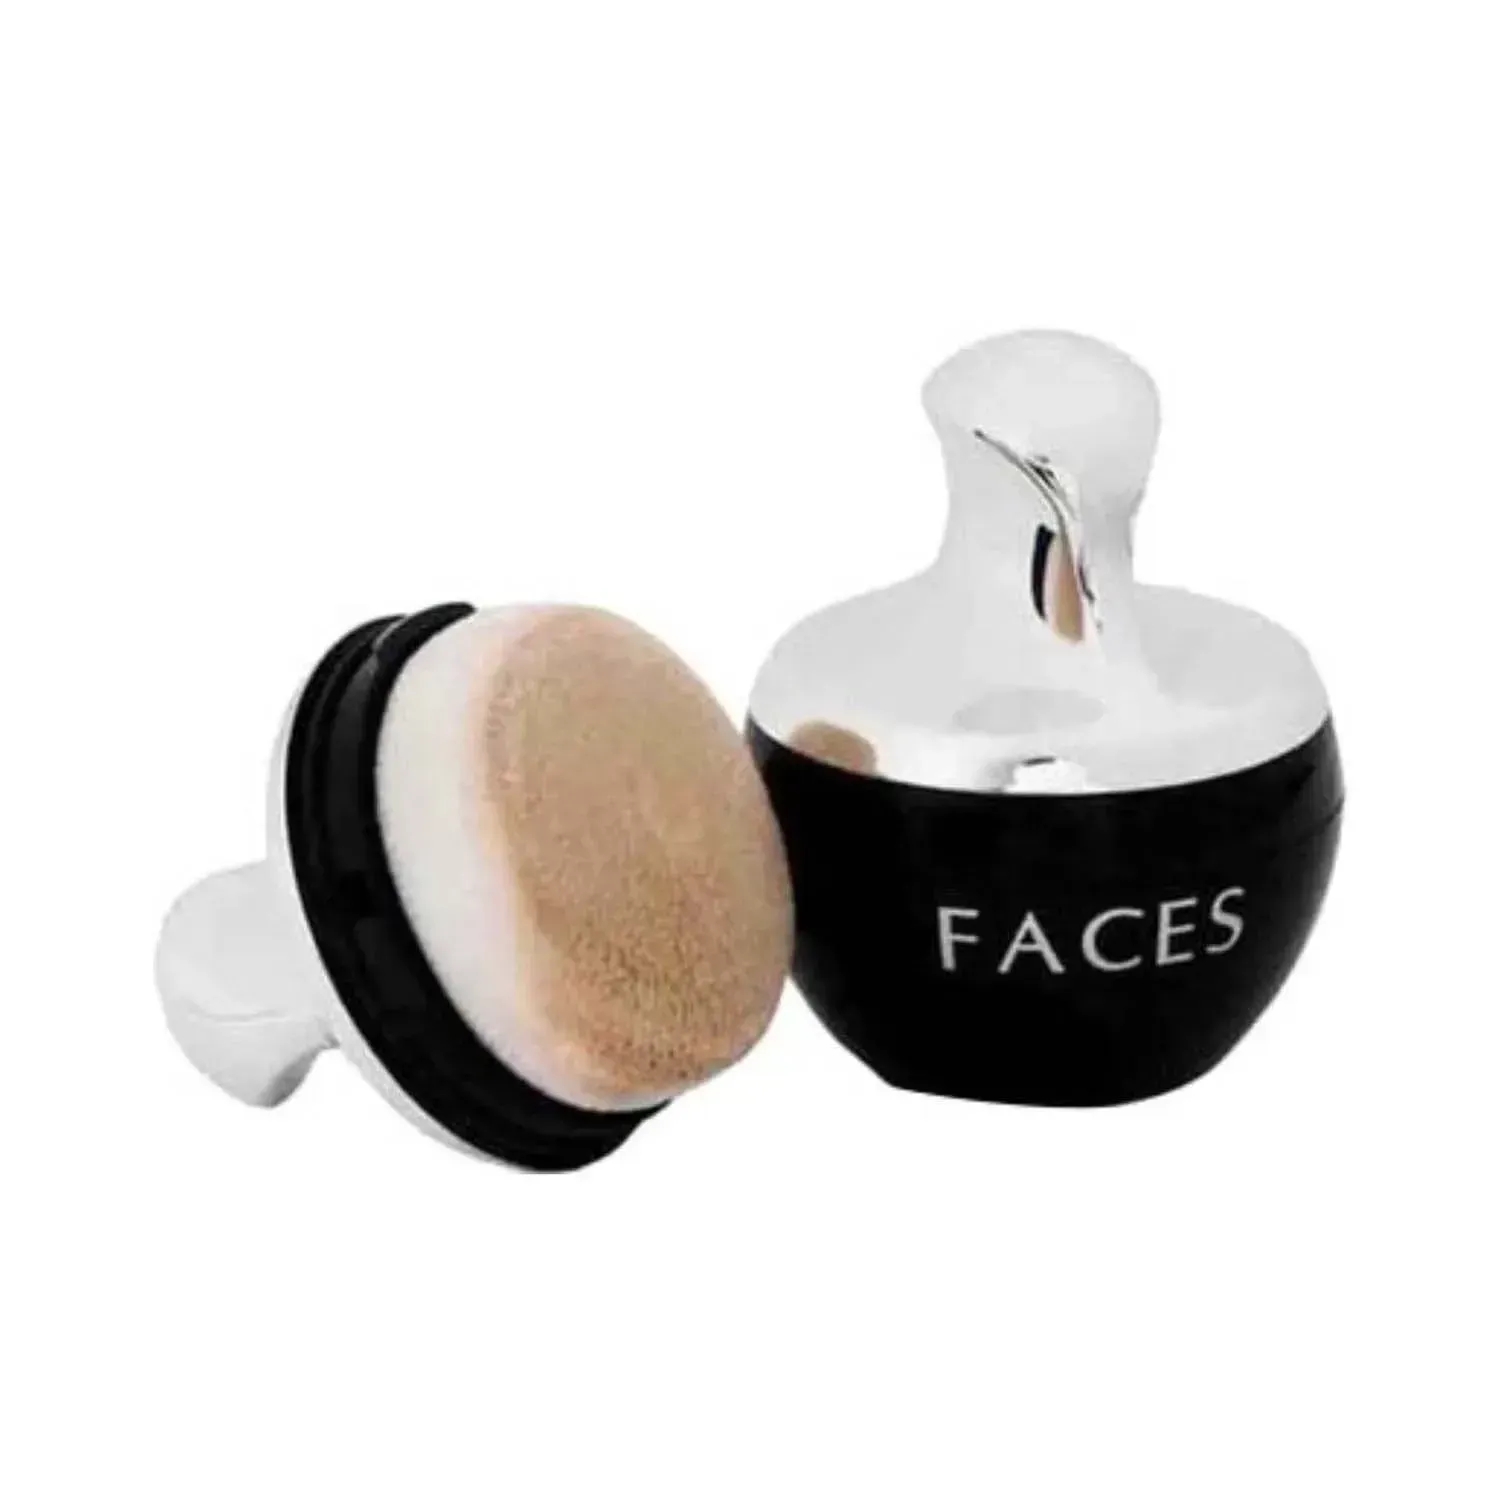 Faces Canada | Faces Canada Ultime Pro Mineral Loose Powder - 05 Natural Beige (7g)